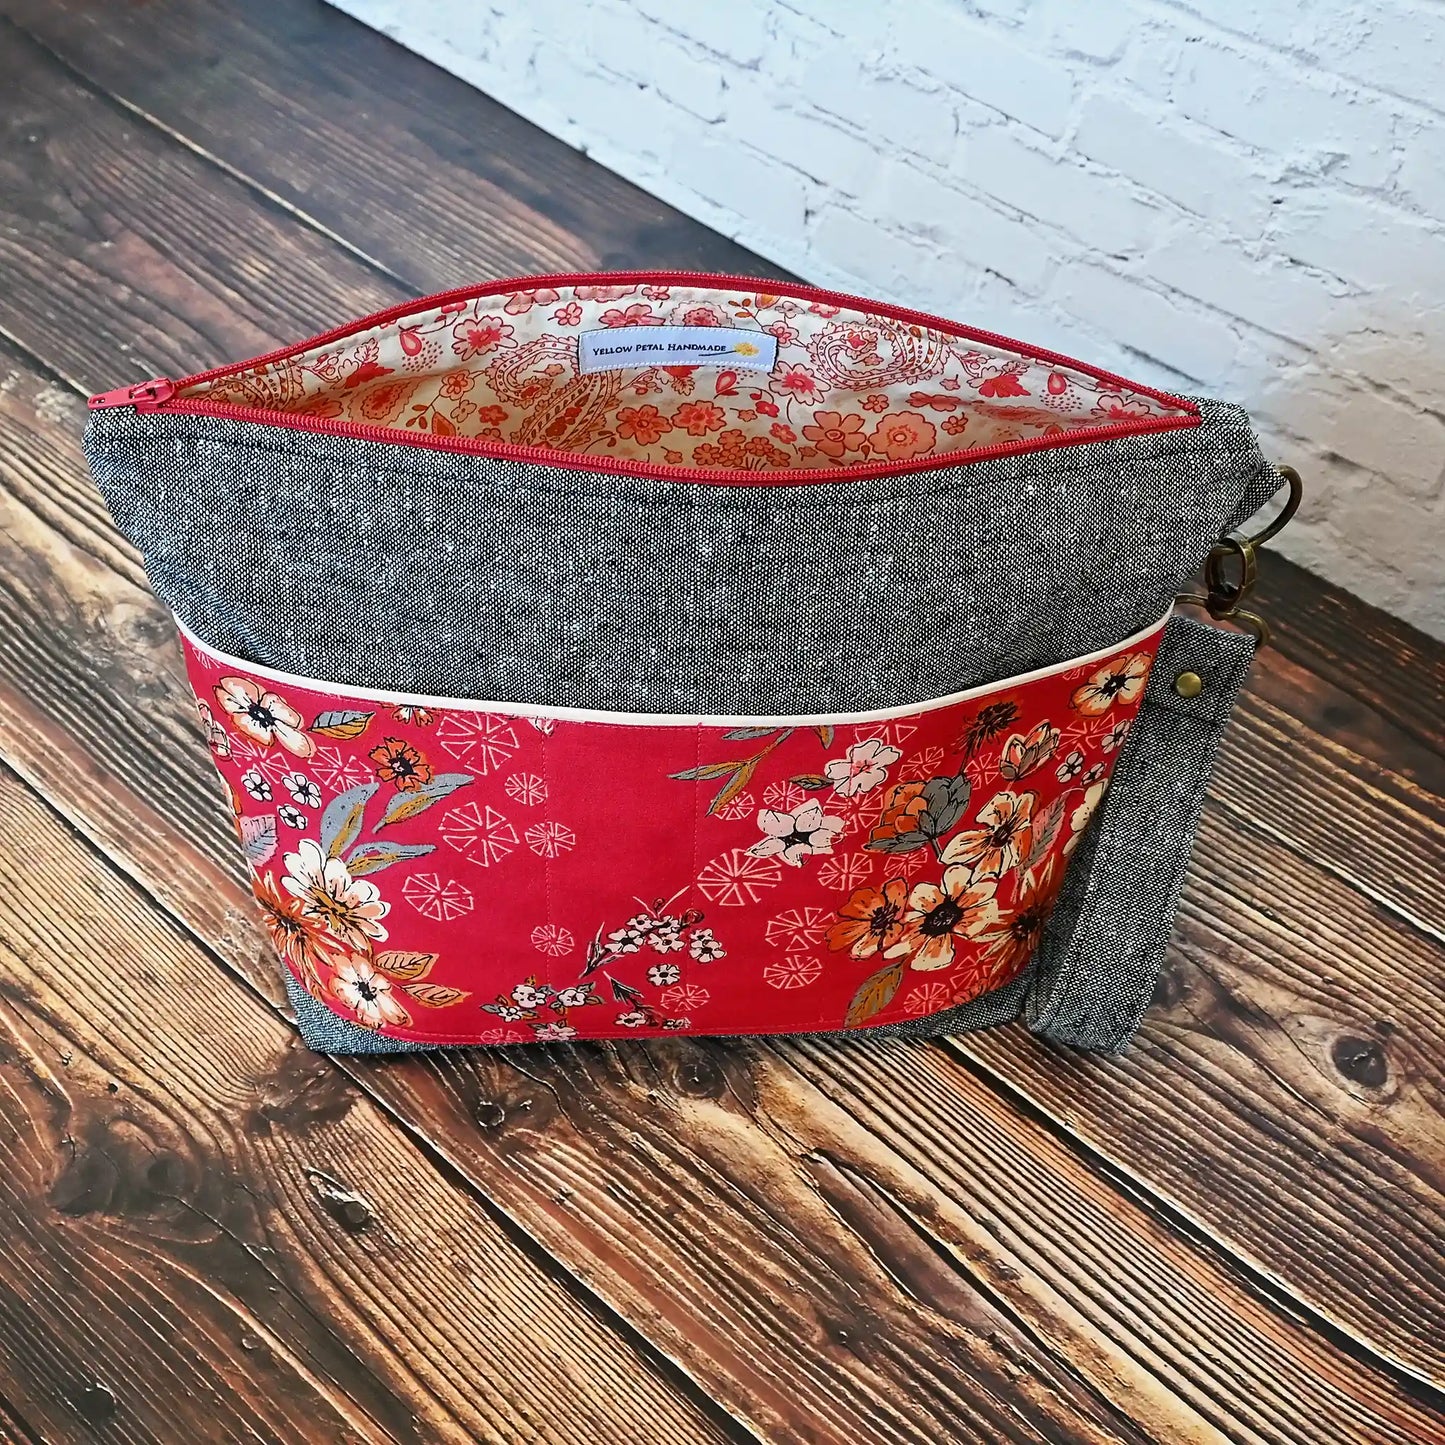 Beautiful grey linen project bag with red floral exterior pockets in  premium Art Gallery cotton.  Comes with a removal wrist strap.  Lined in a fun floral and paisley print.  Made in Nova Scotia Canada by Yellow Petal Handmade.